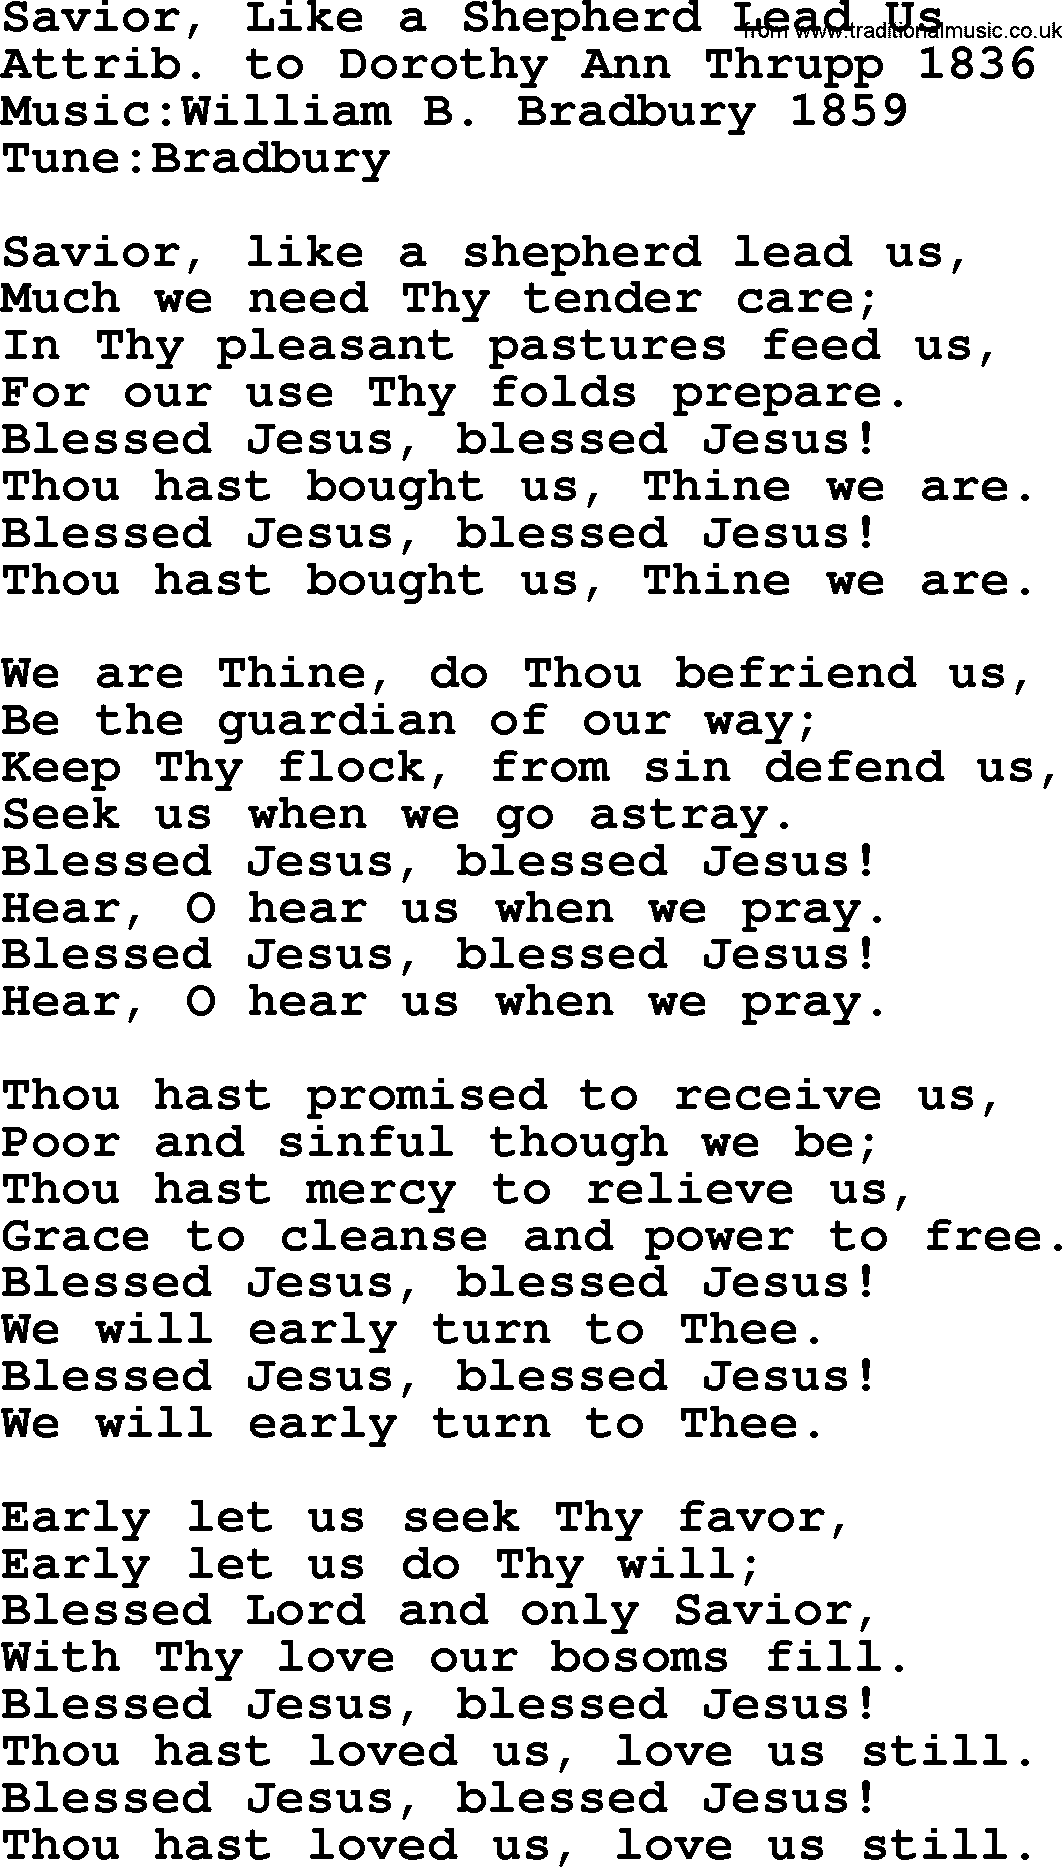 A collection of 500+ most sung Christian church hymns and songs, title: Savior, Like A Shepherd Lead Us, lyrics, PPTX and PDF